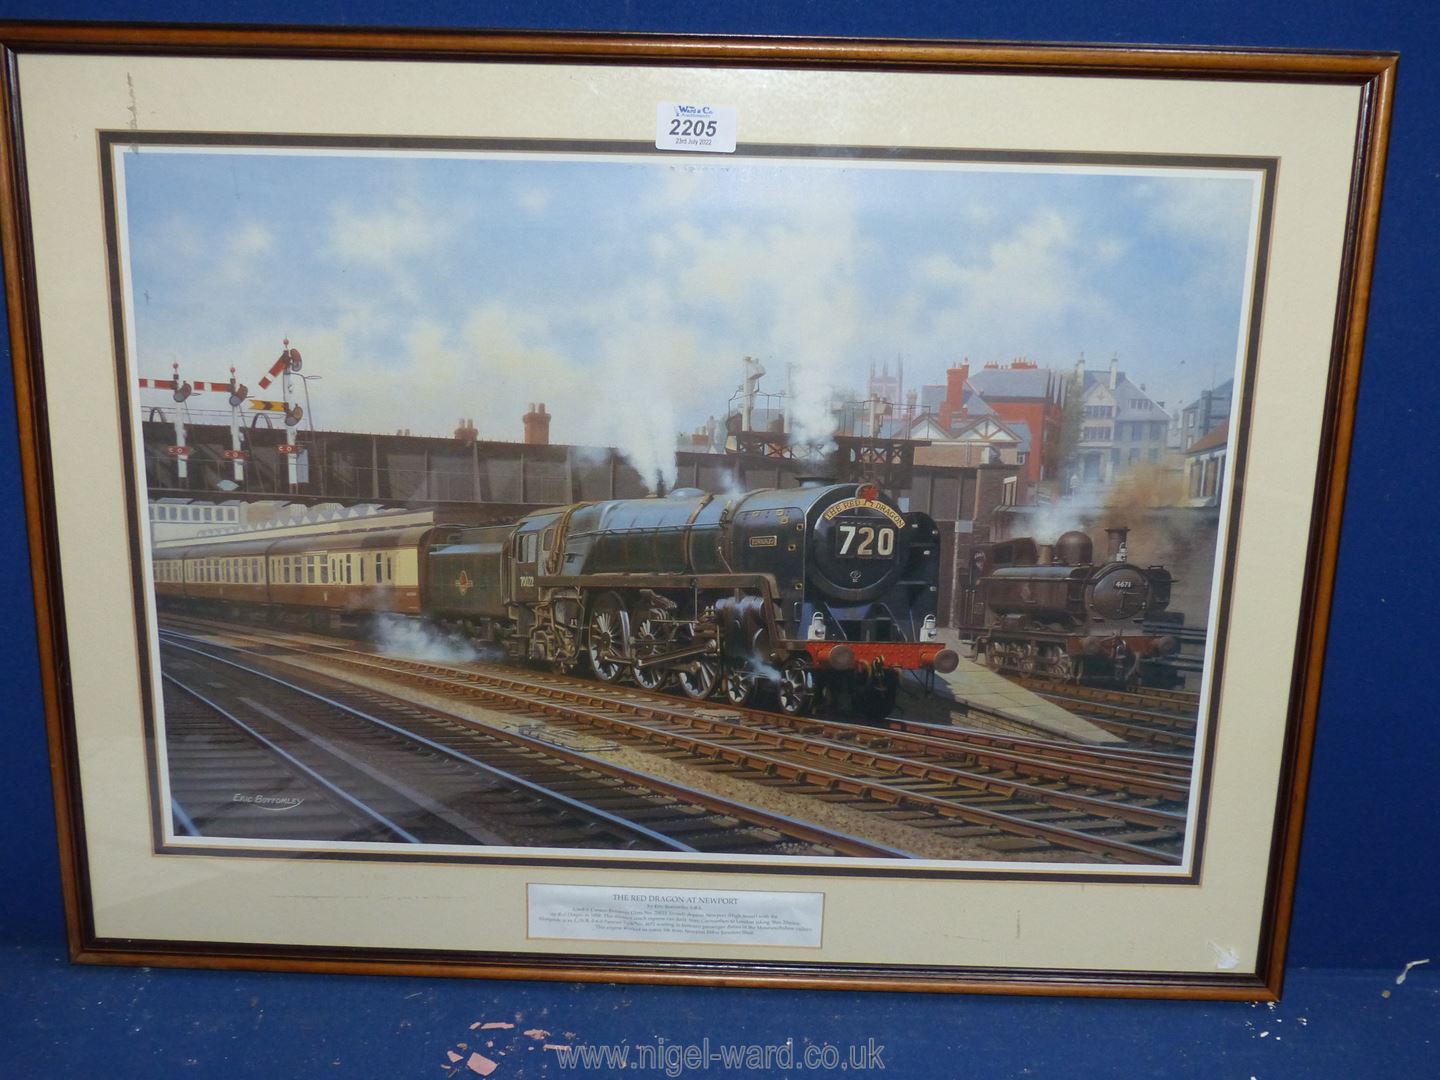 A framed and mounted Eric Bottomley Print titled 'The Red Dragon at Newport'.